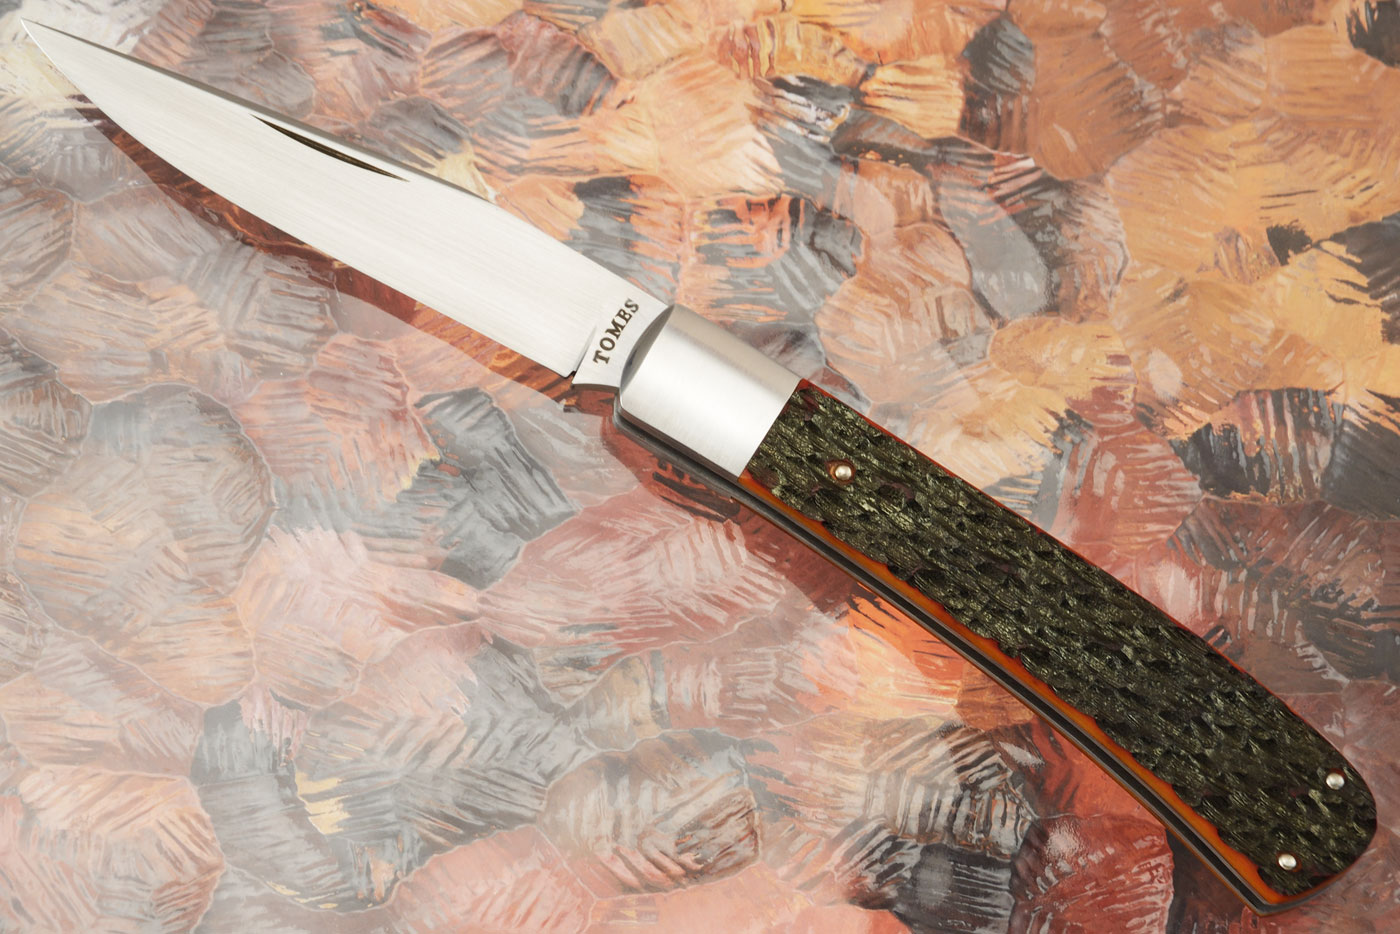 Slipjoint Trapper with Jigged Bone